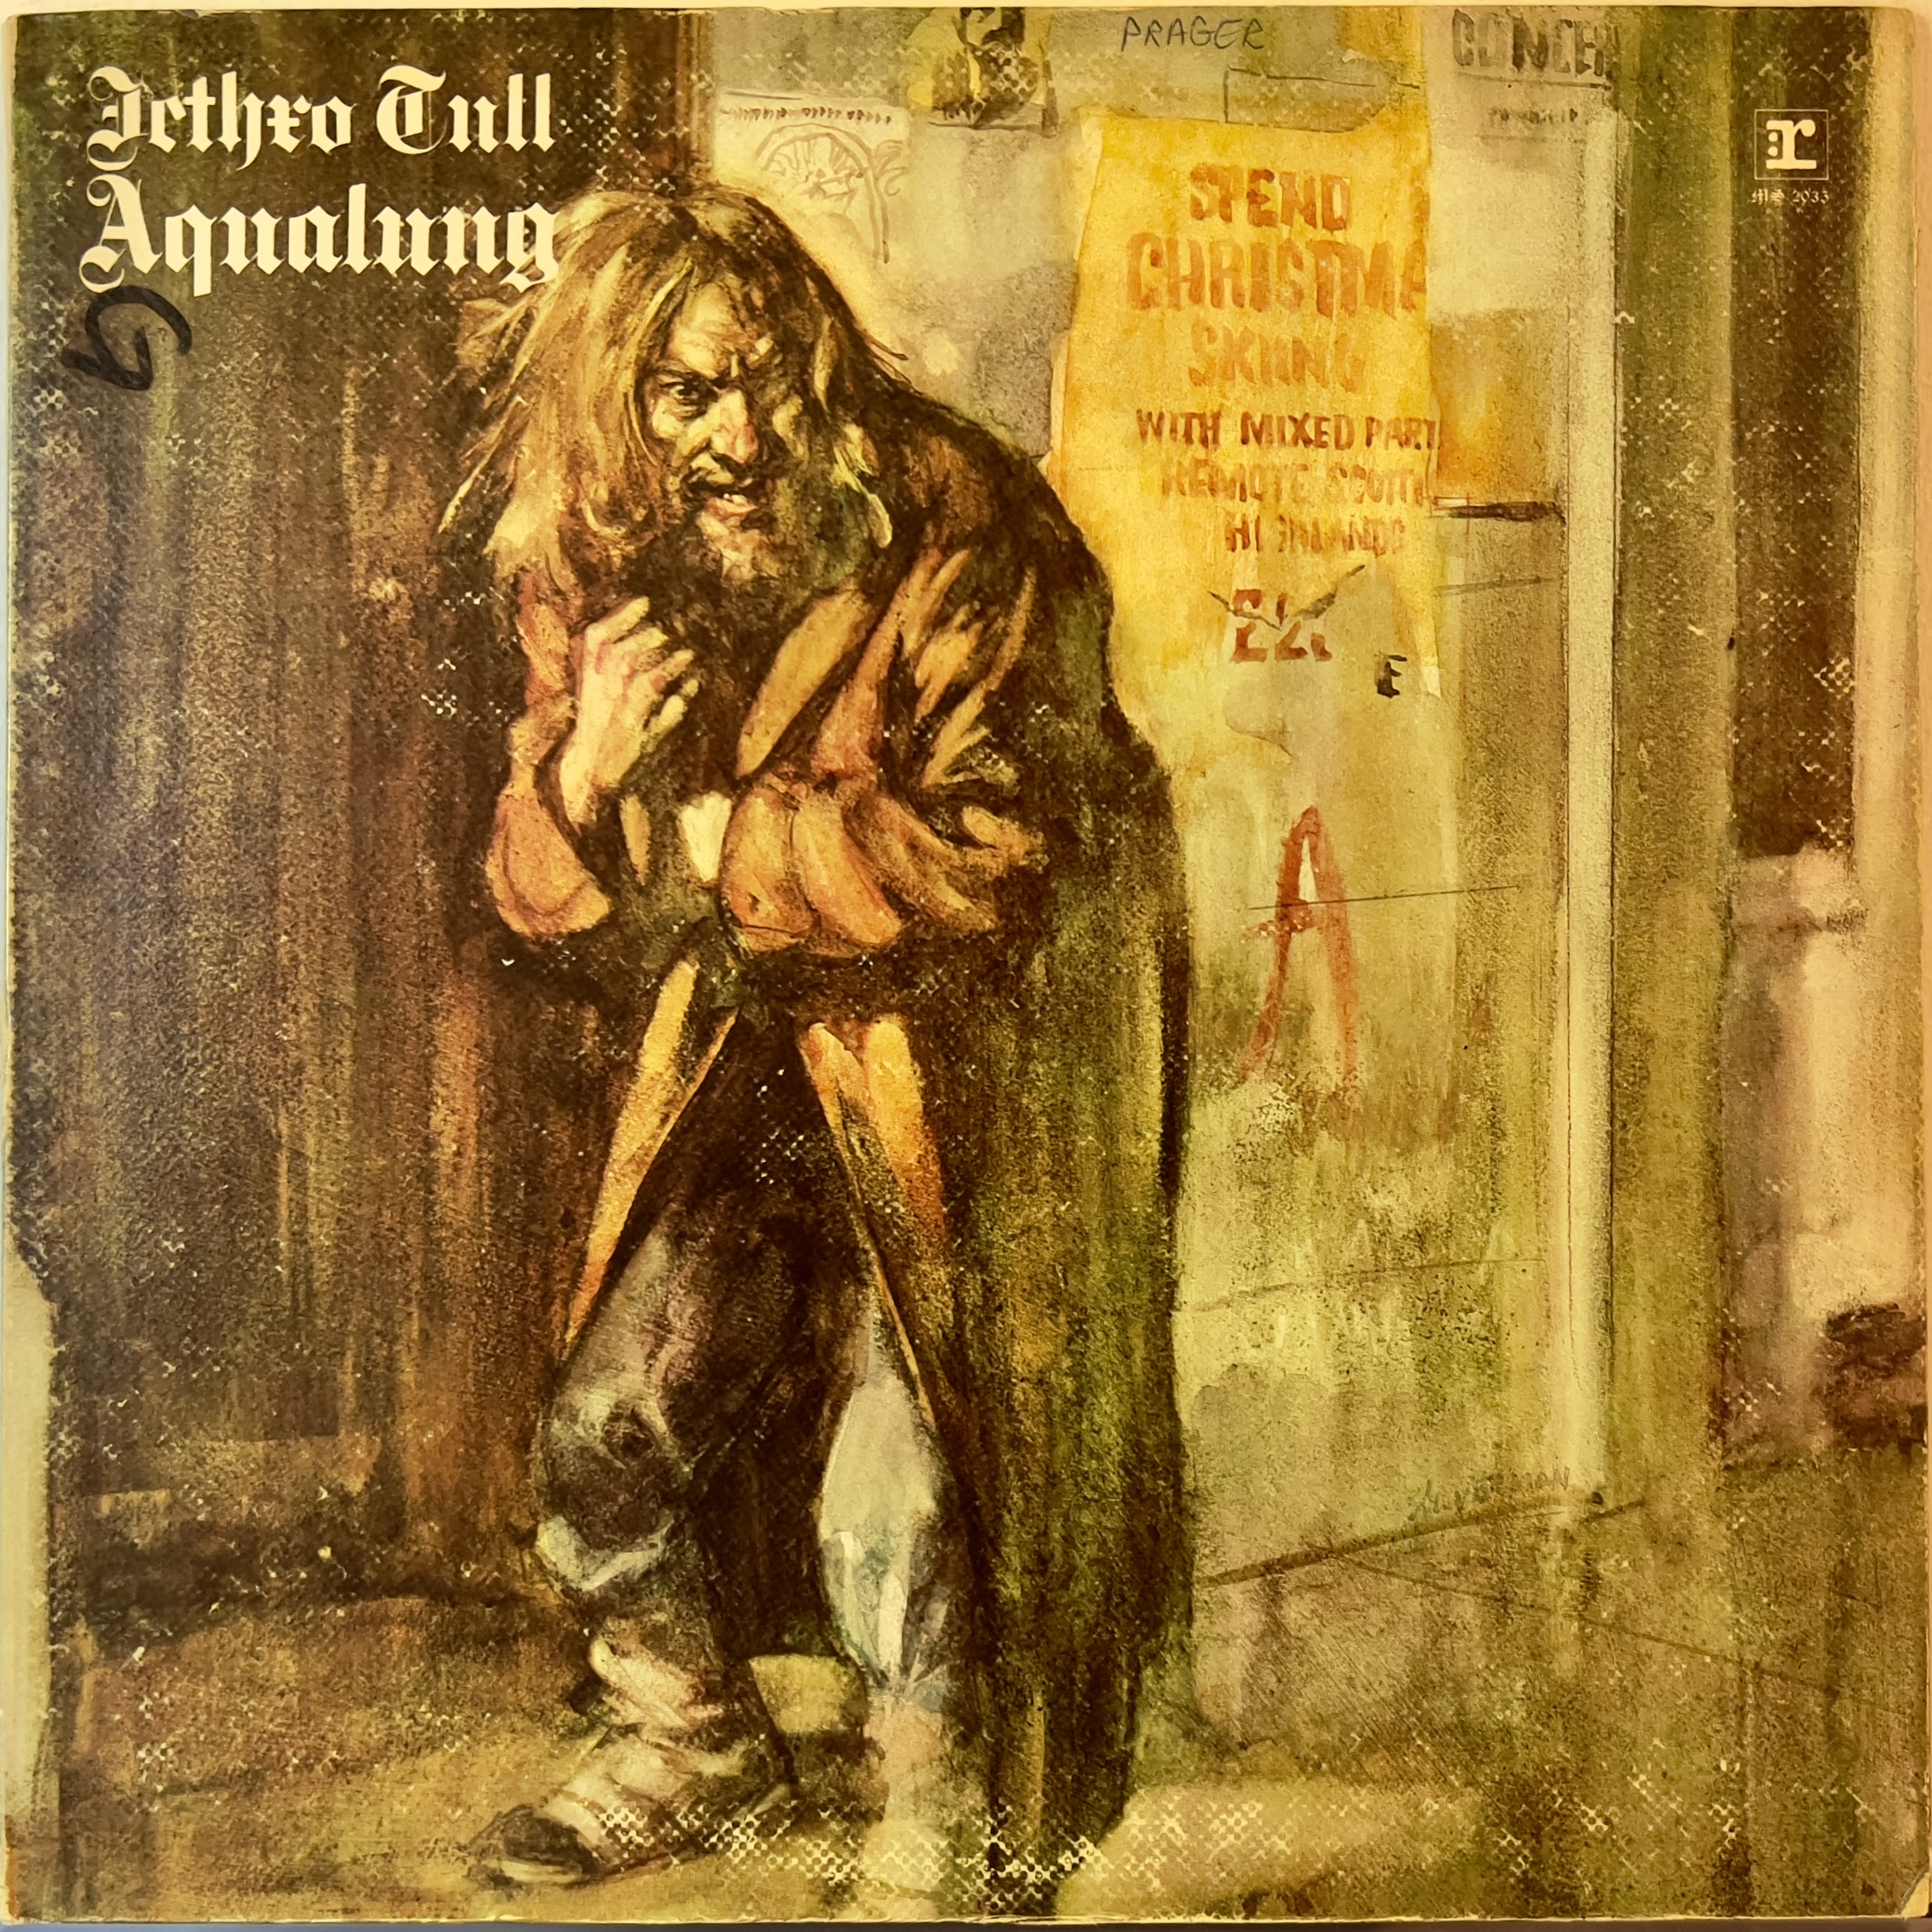 Aqualung by Jethro Tull